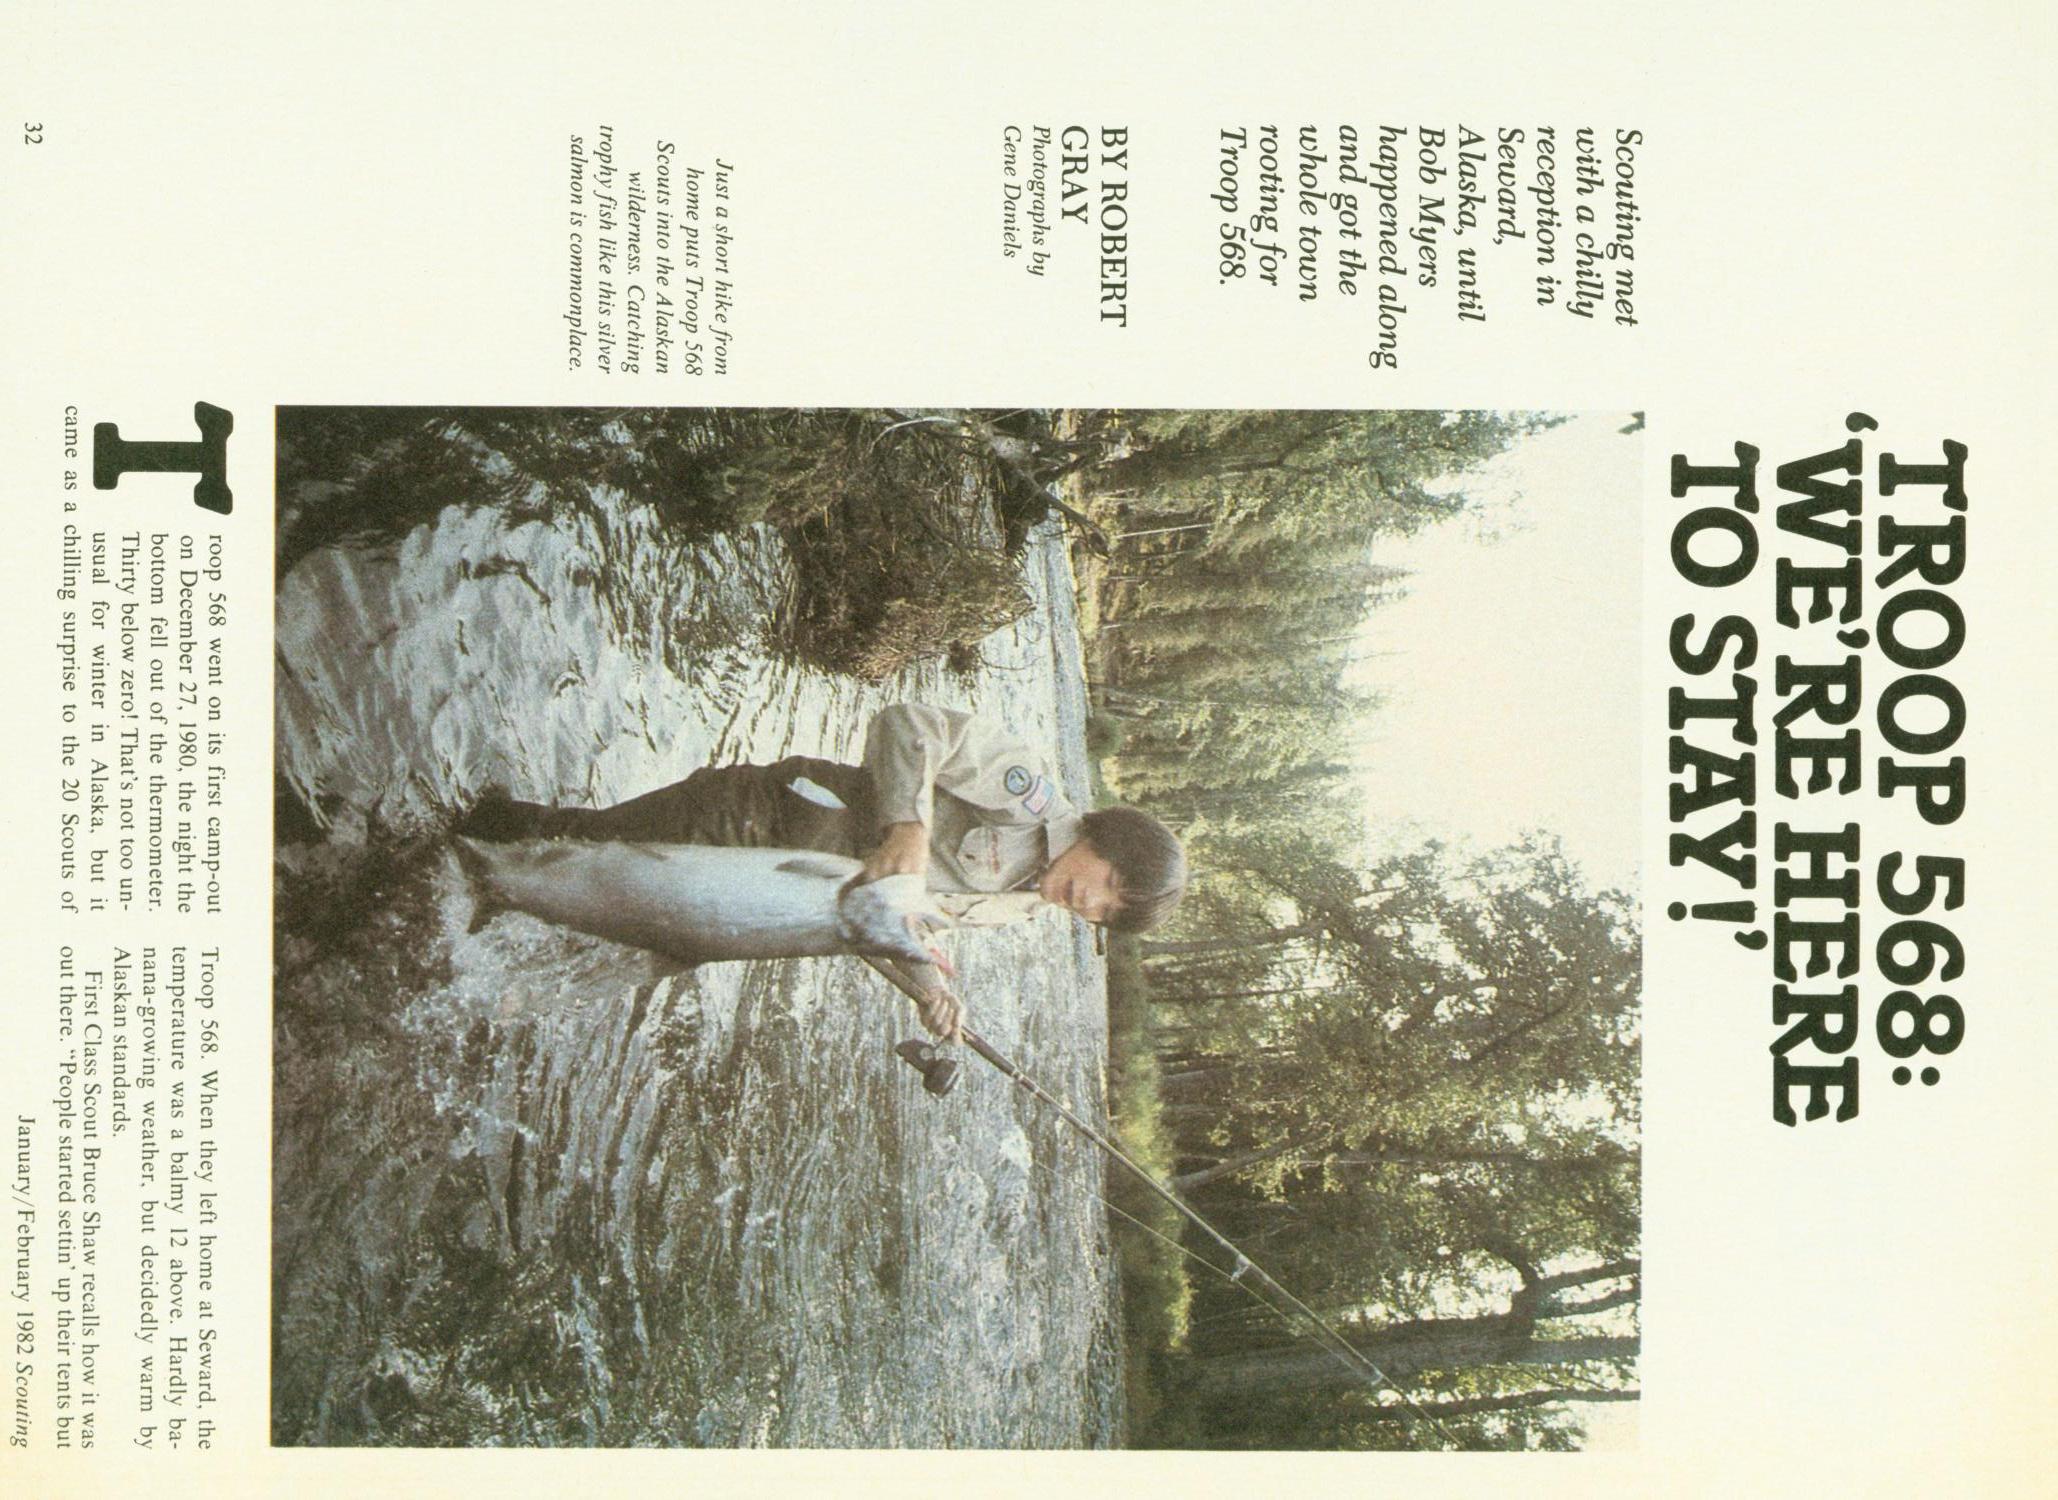 Scouting, Volume 70, Number 1, January-February 1982
                                                
                                                    32
                                                